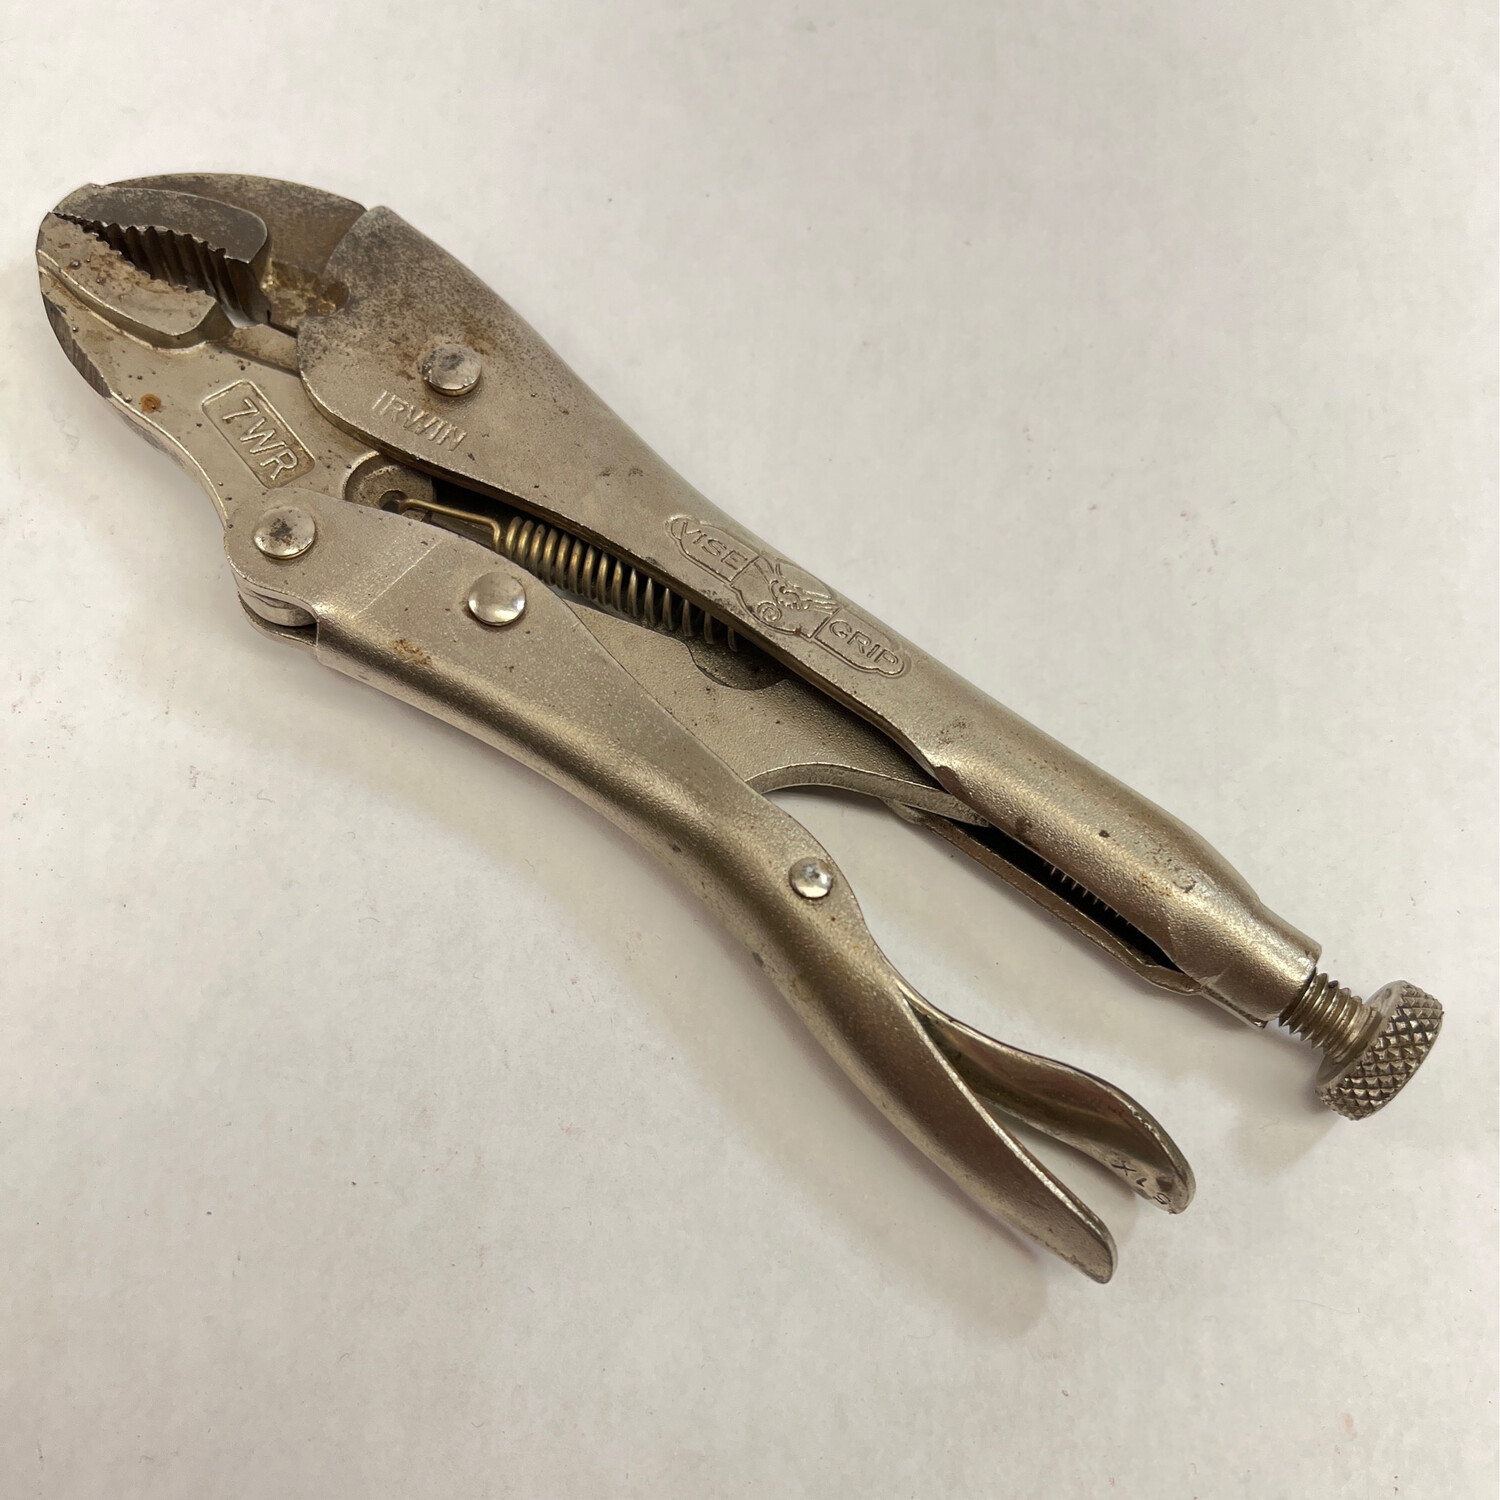 Irwin Vise Grip 7” Curved Jaw Locking Pliers, 7WR